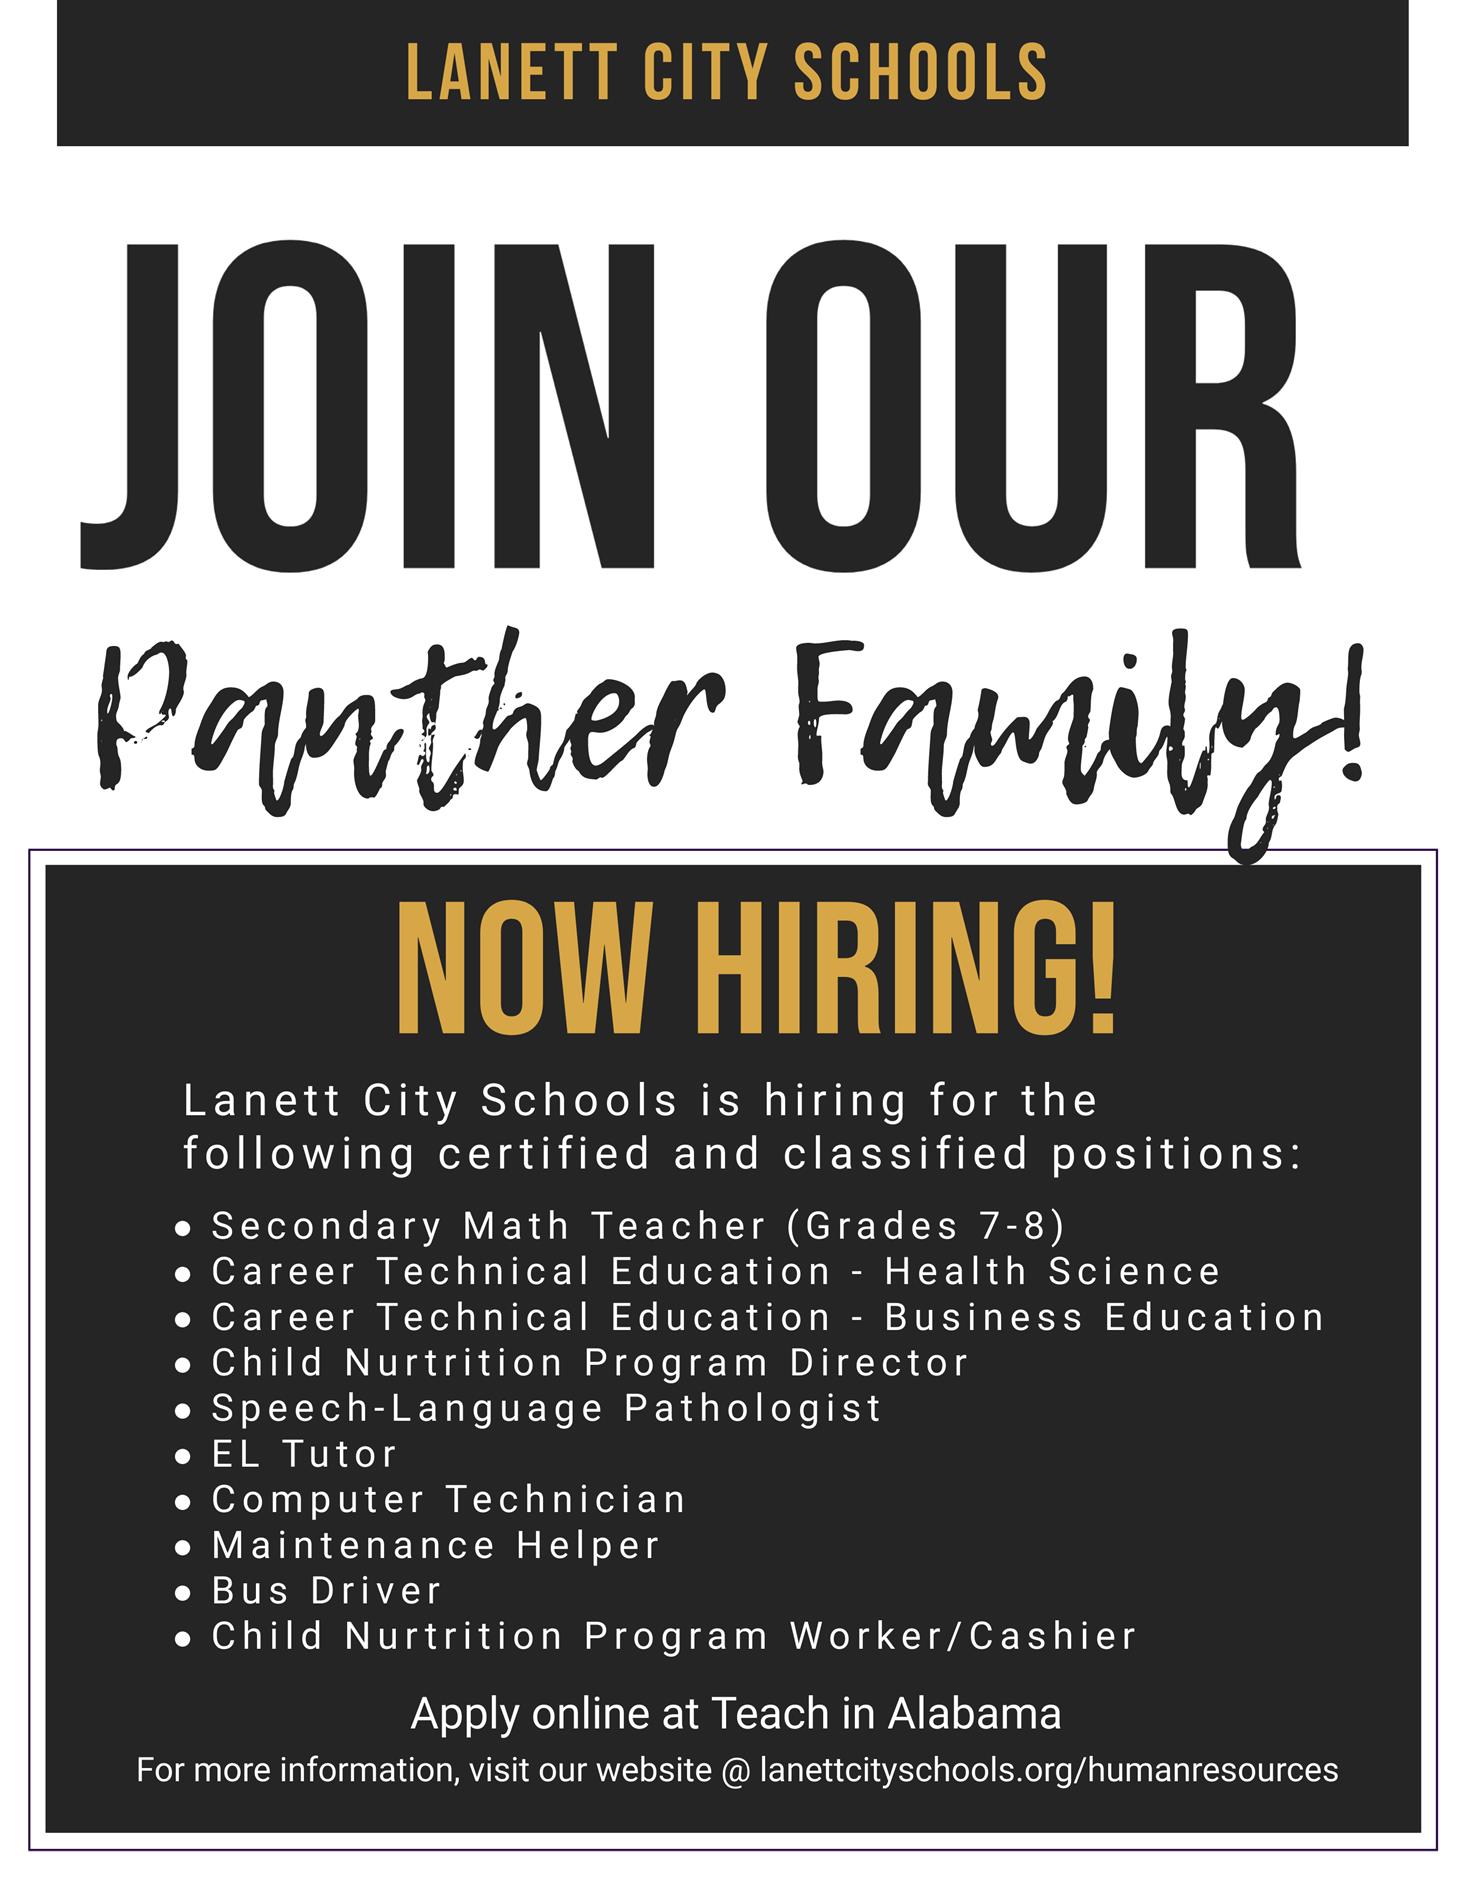 Join the Lanett Panther! Hiring Now Flyer. Click on the image for the PDF.